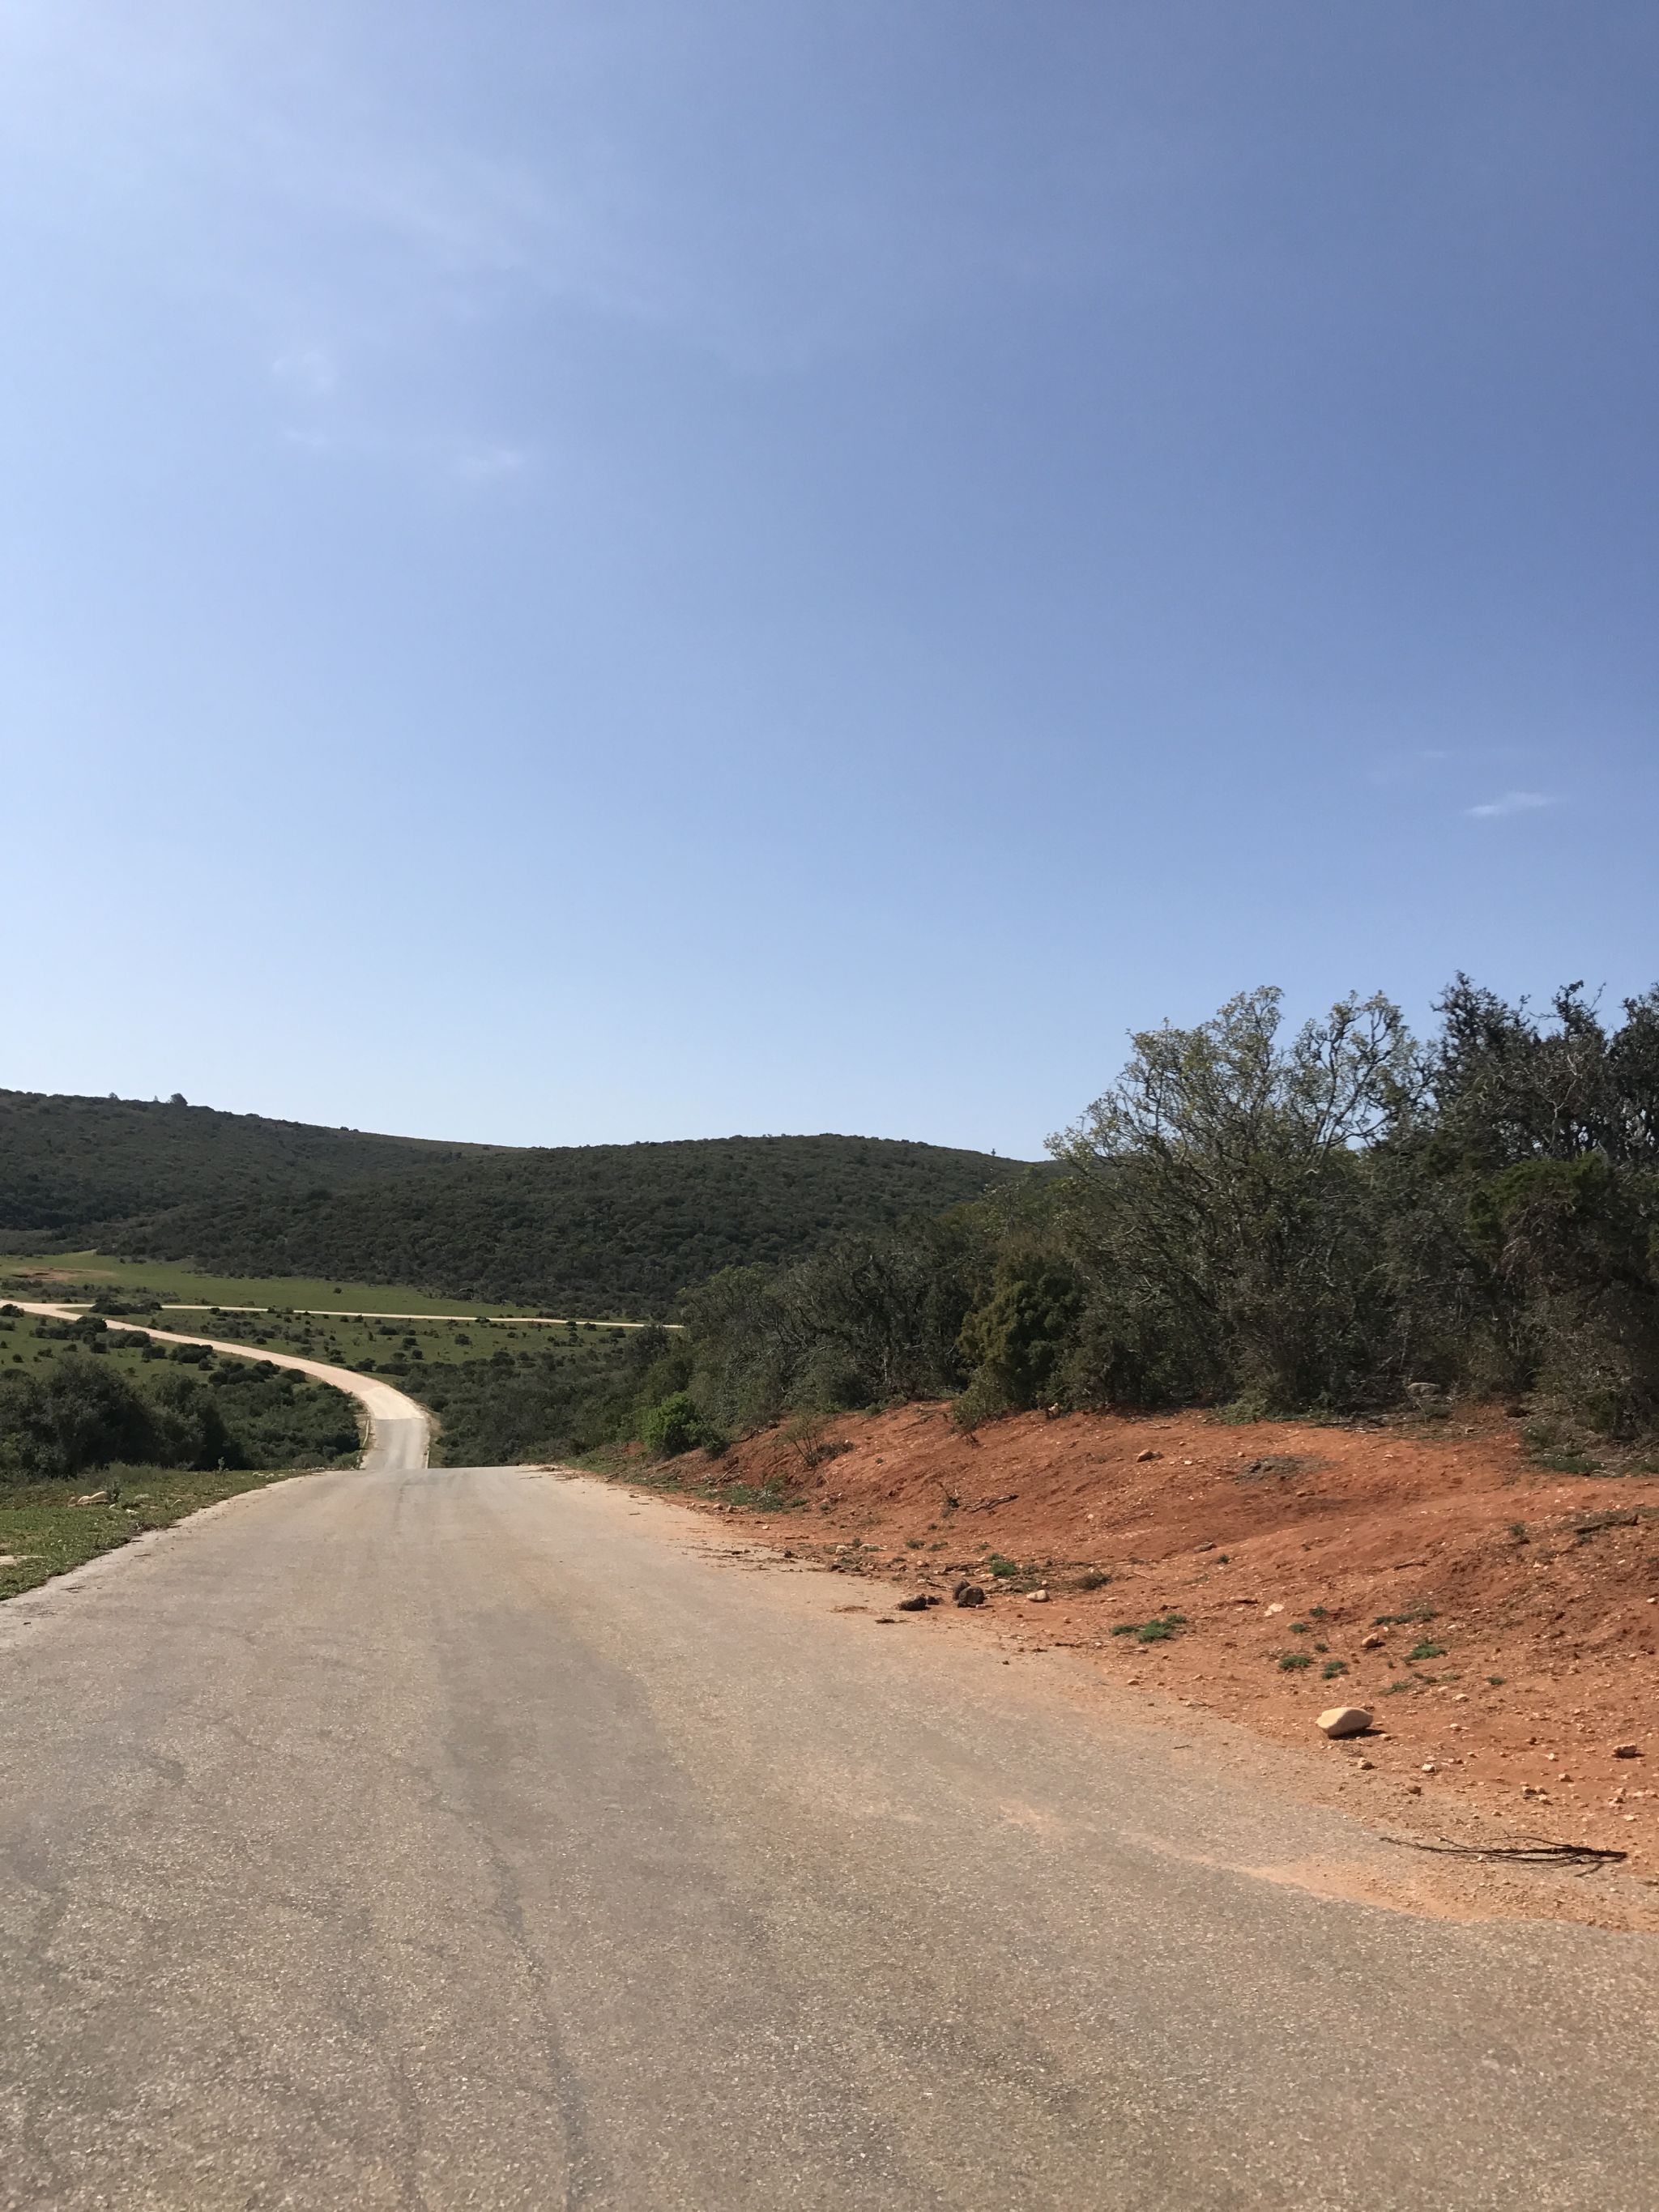 One of the paved roads in Addo